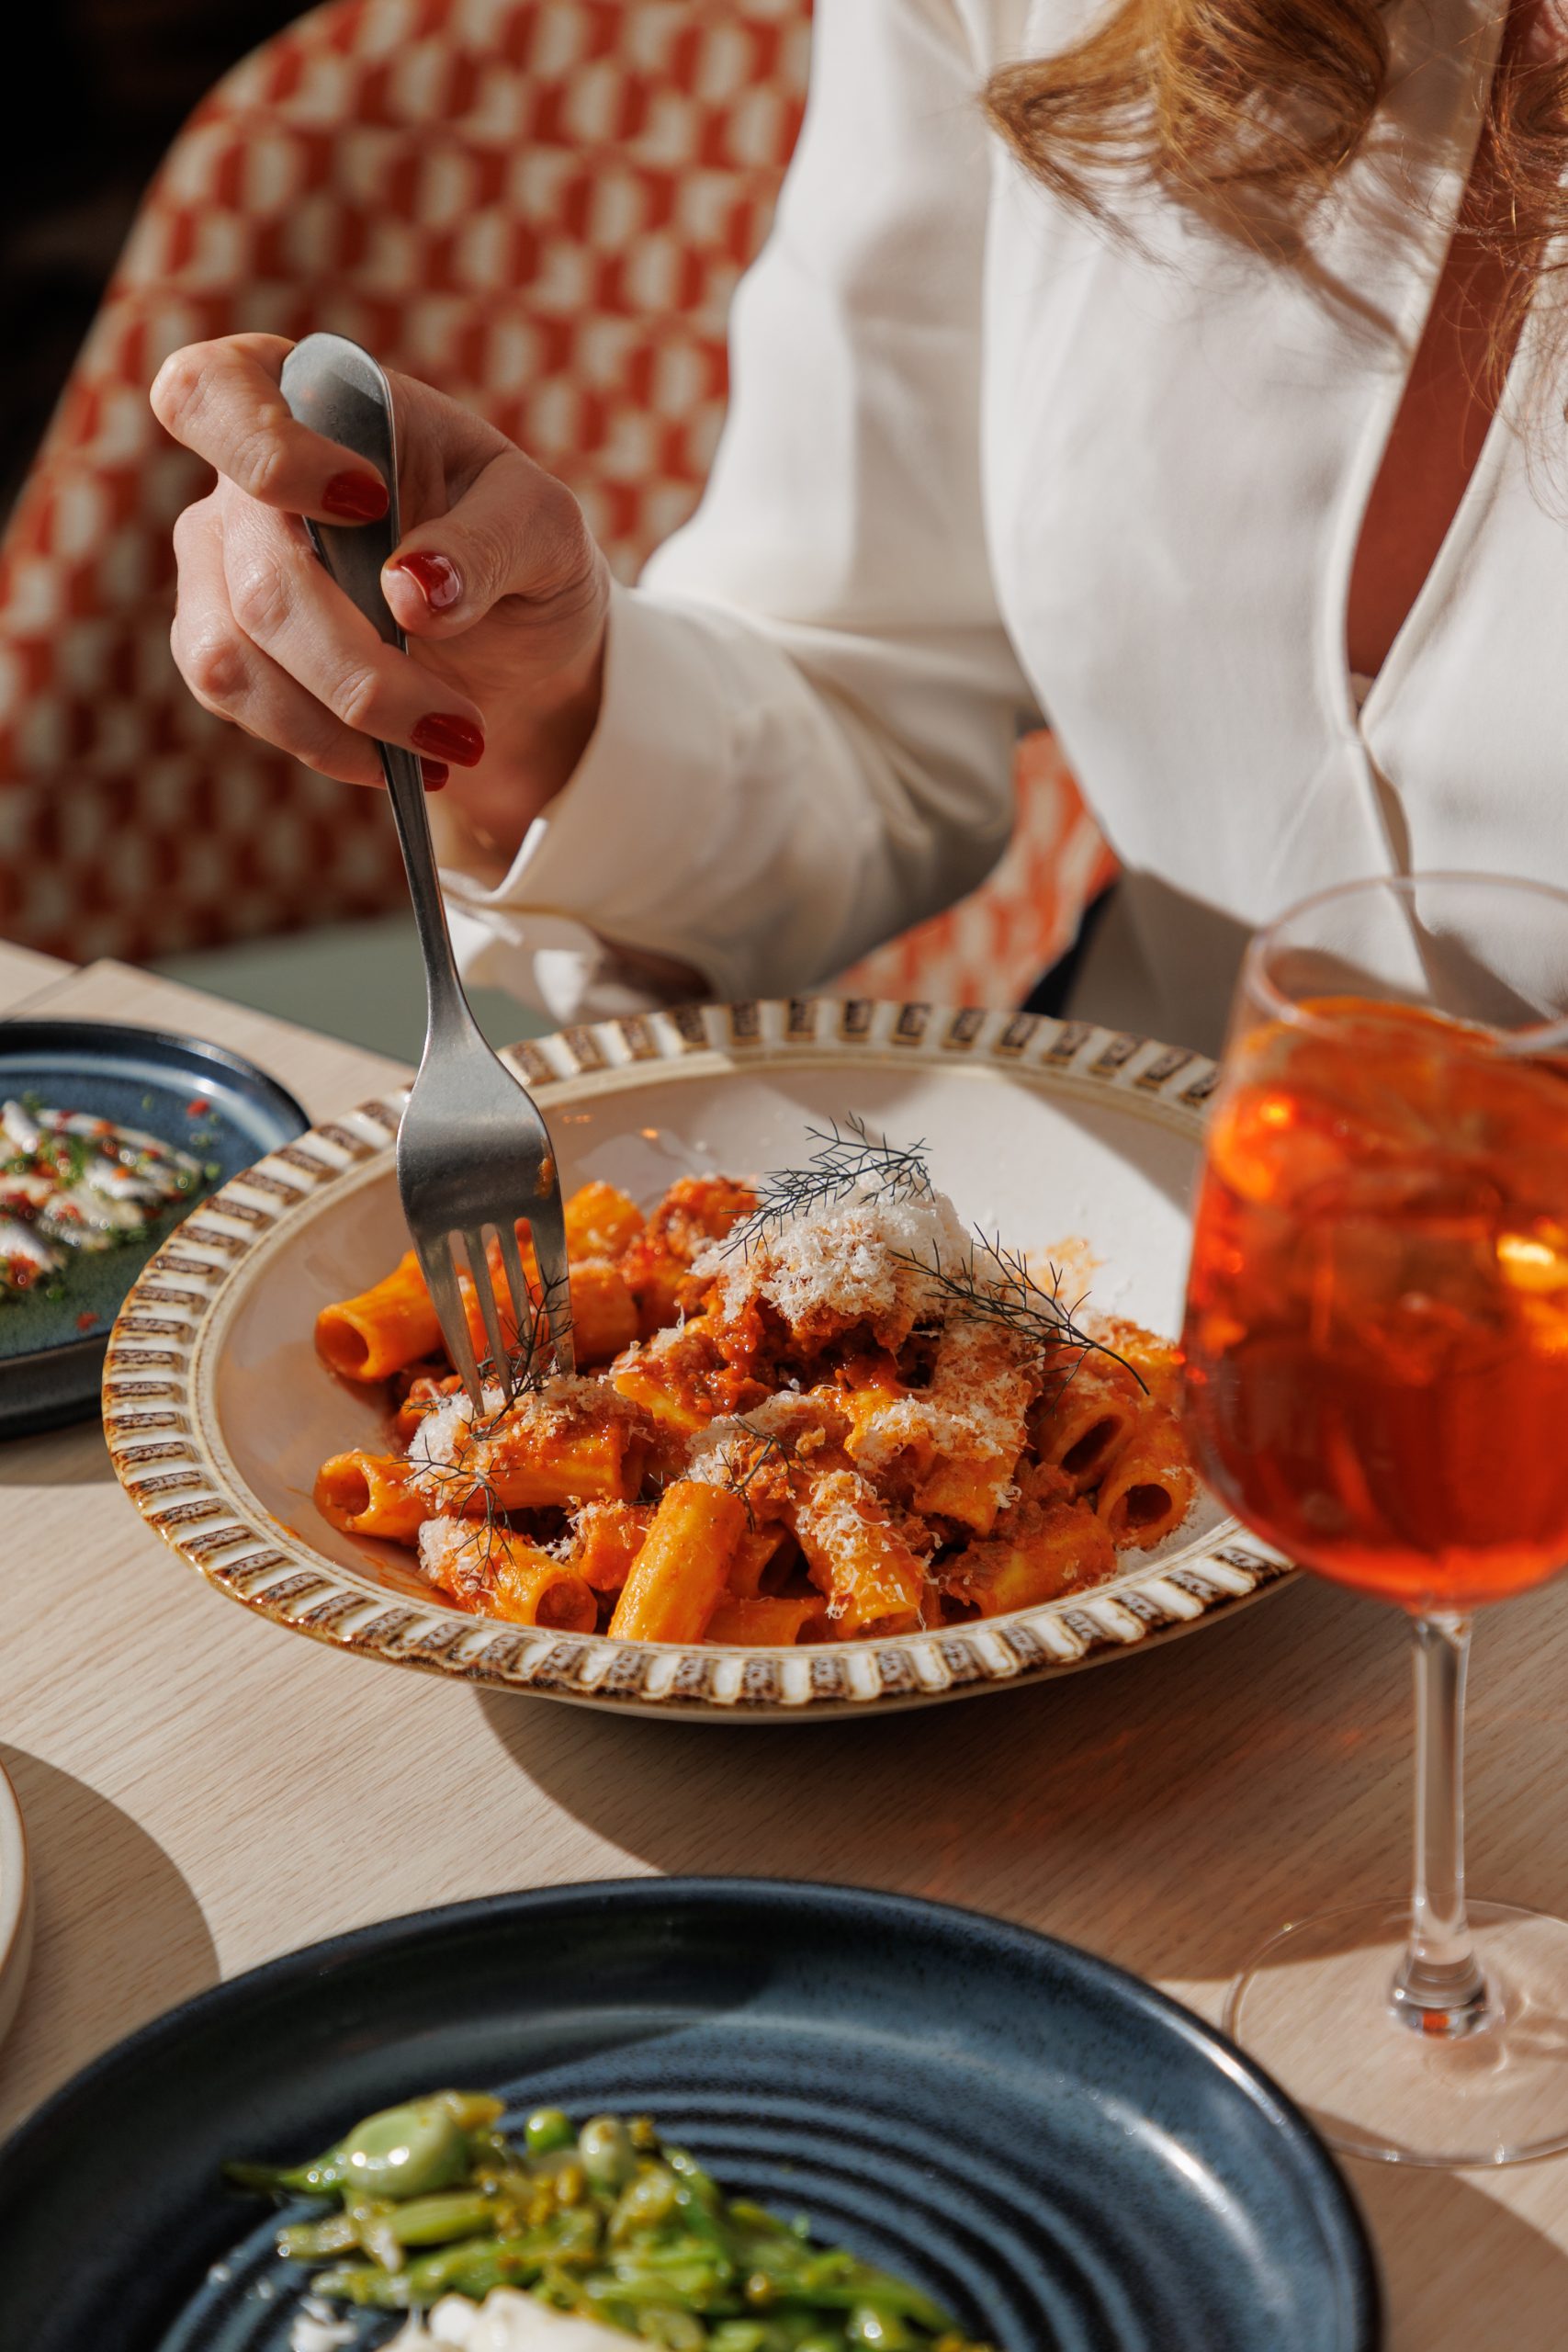 Woman in white blouse eating pasta at a restaurant table with an Aperol Spritz.